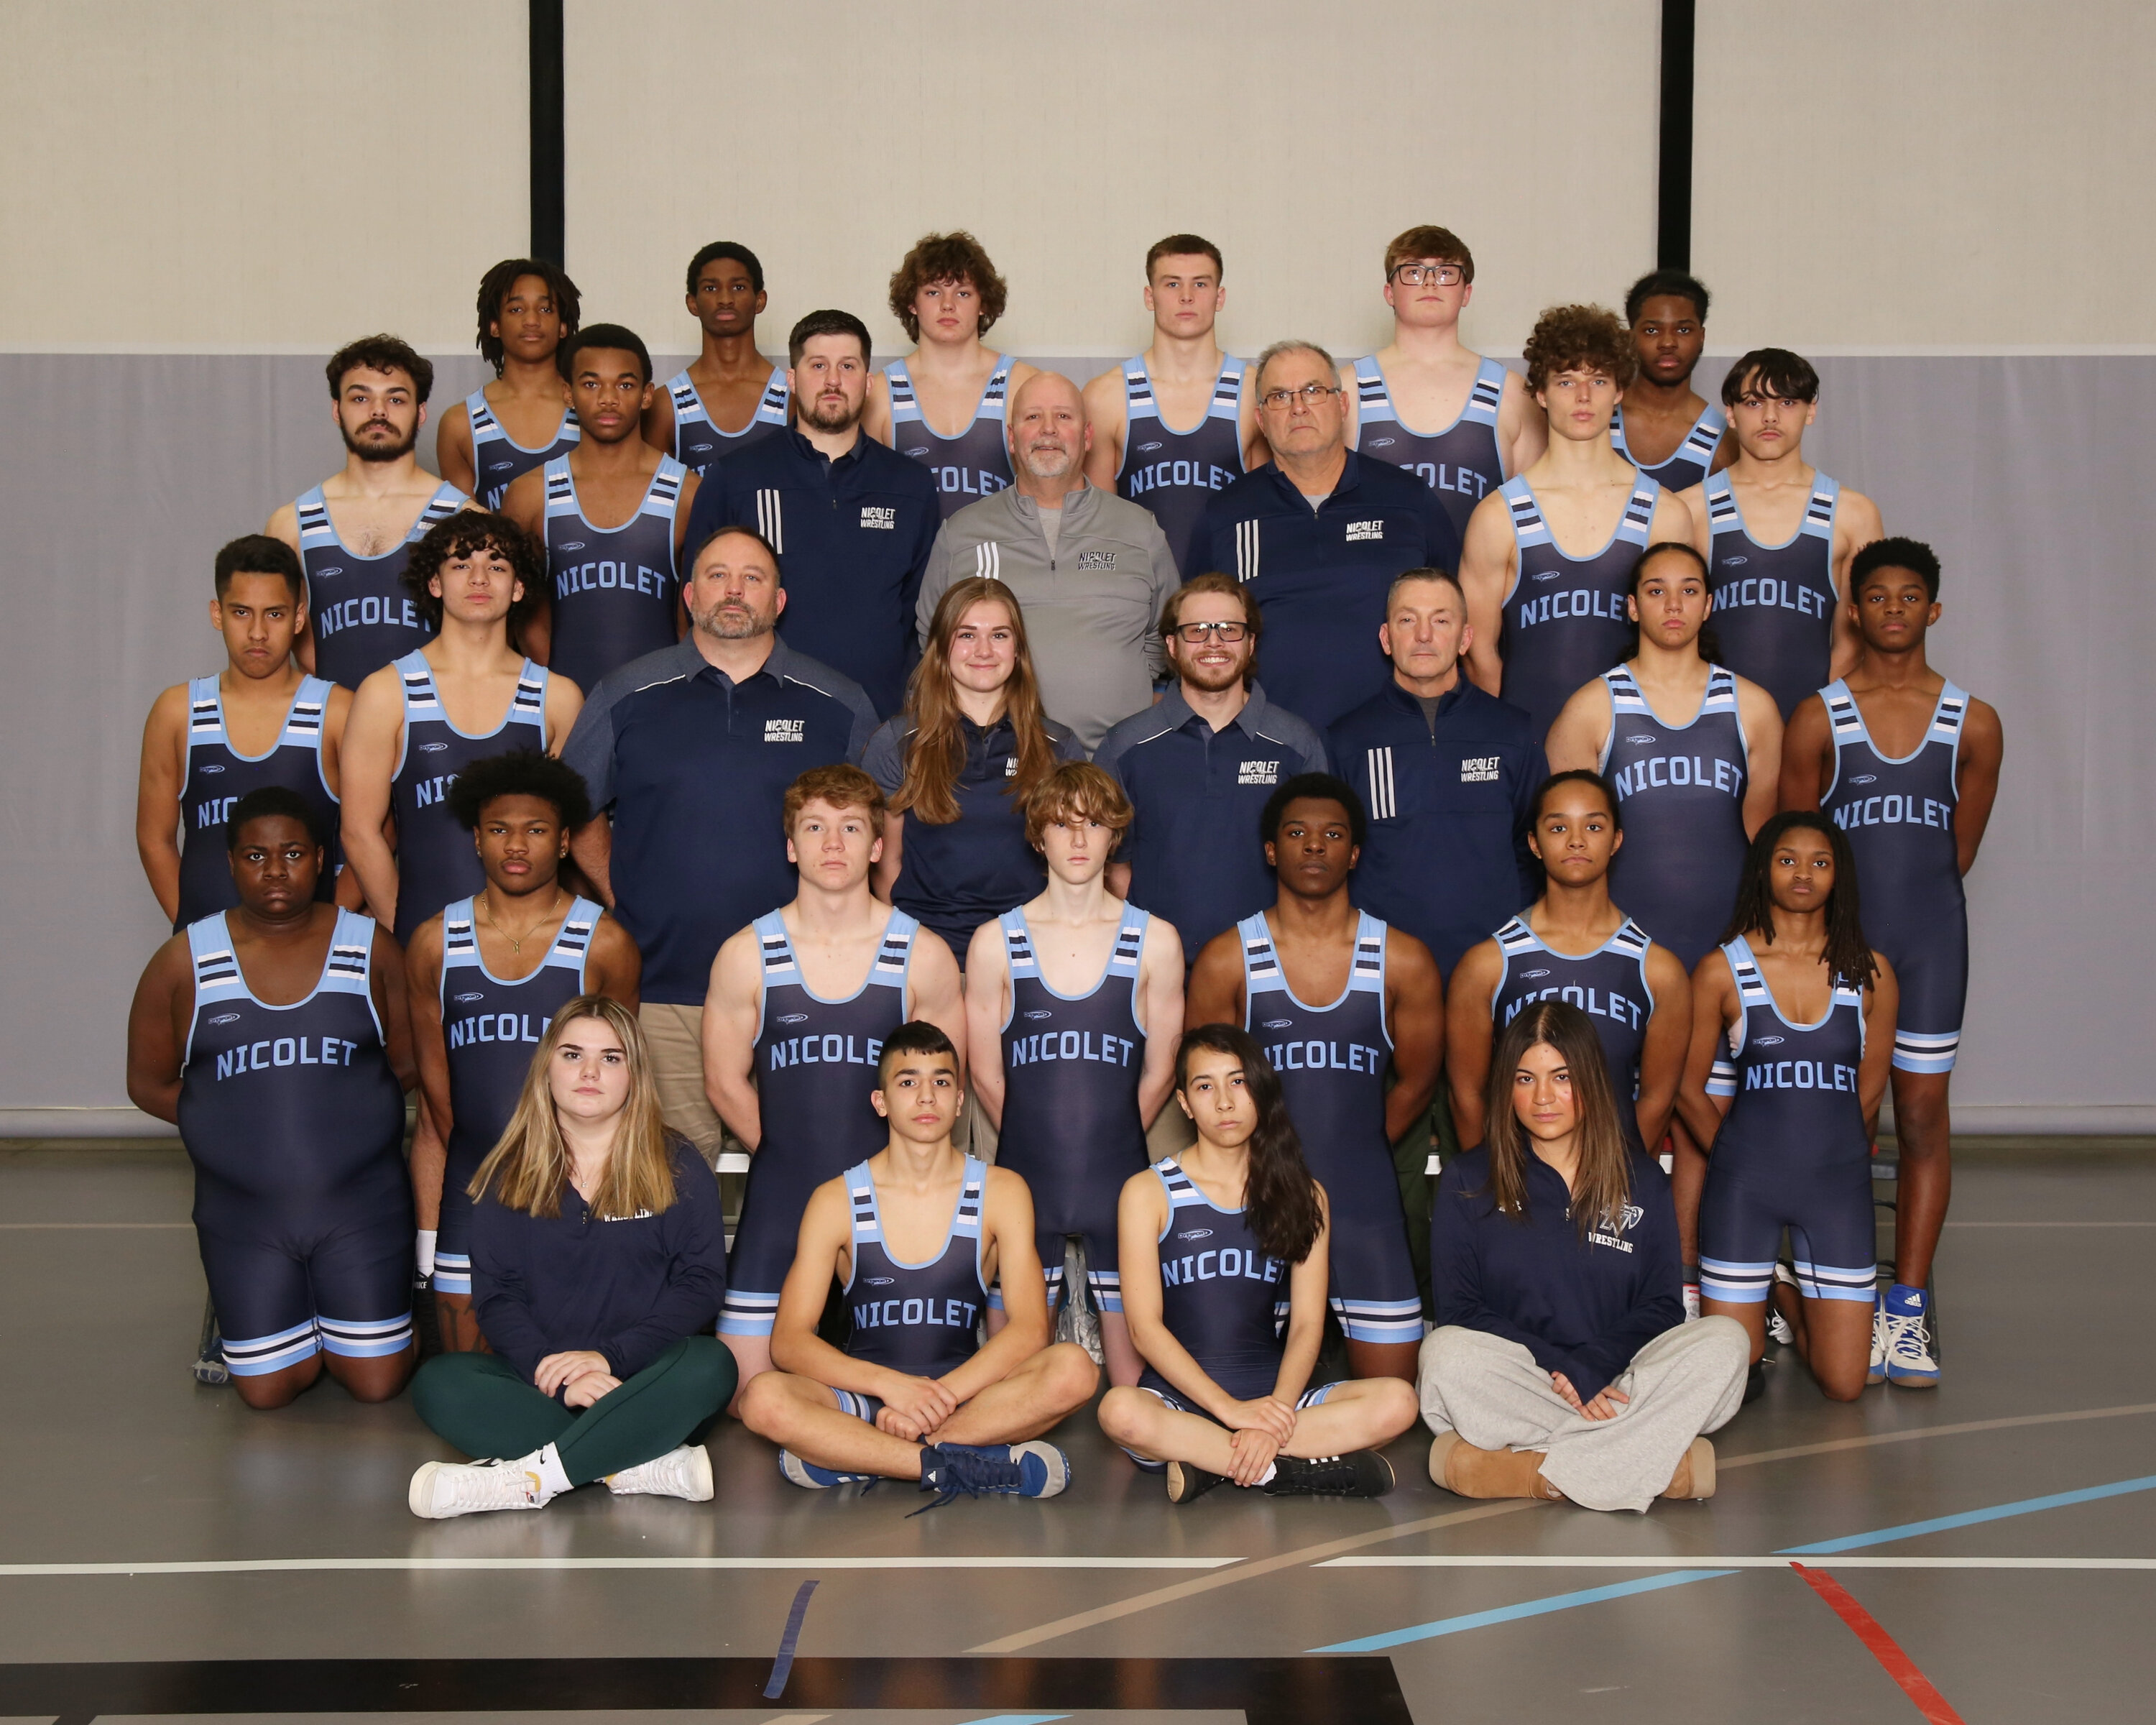 team picture of the nicolet wrestling team posing for a picture